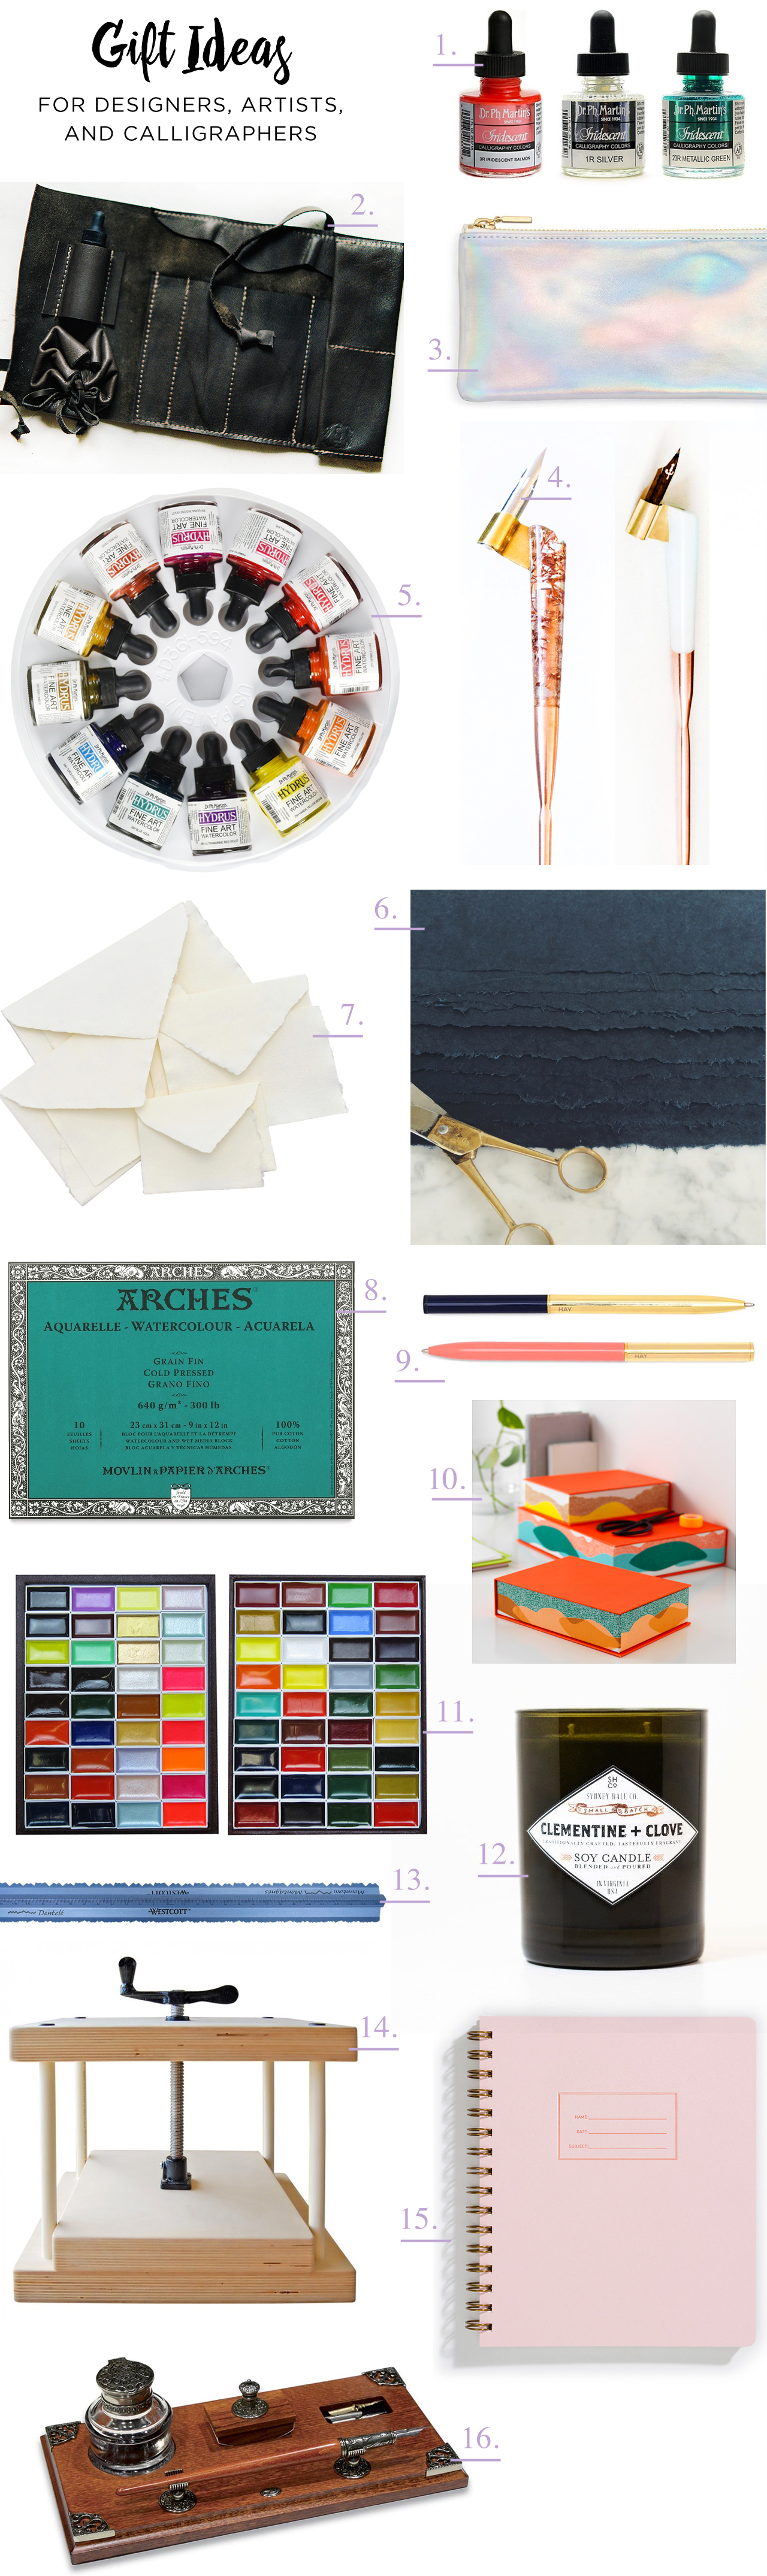 2016 Gift Guide: Gift Ideas for Designers, Artists, and Calligraphers